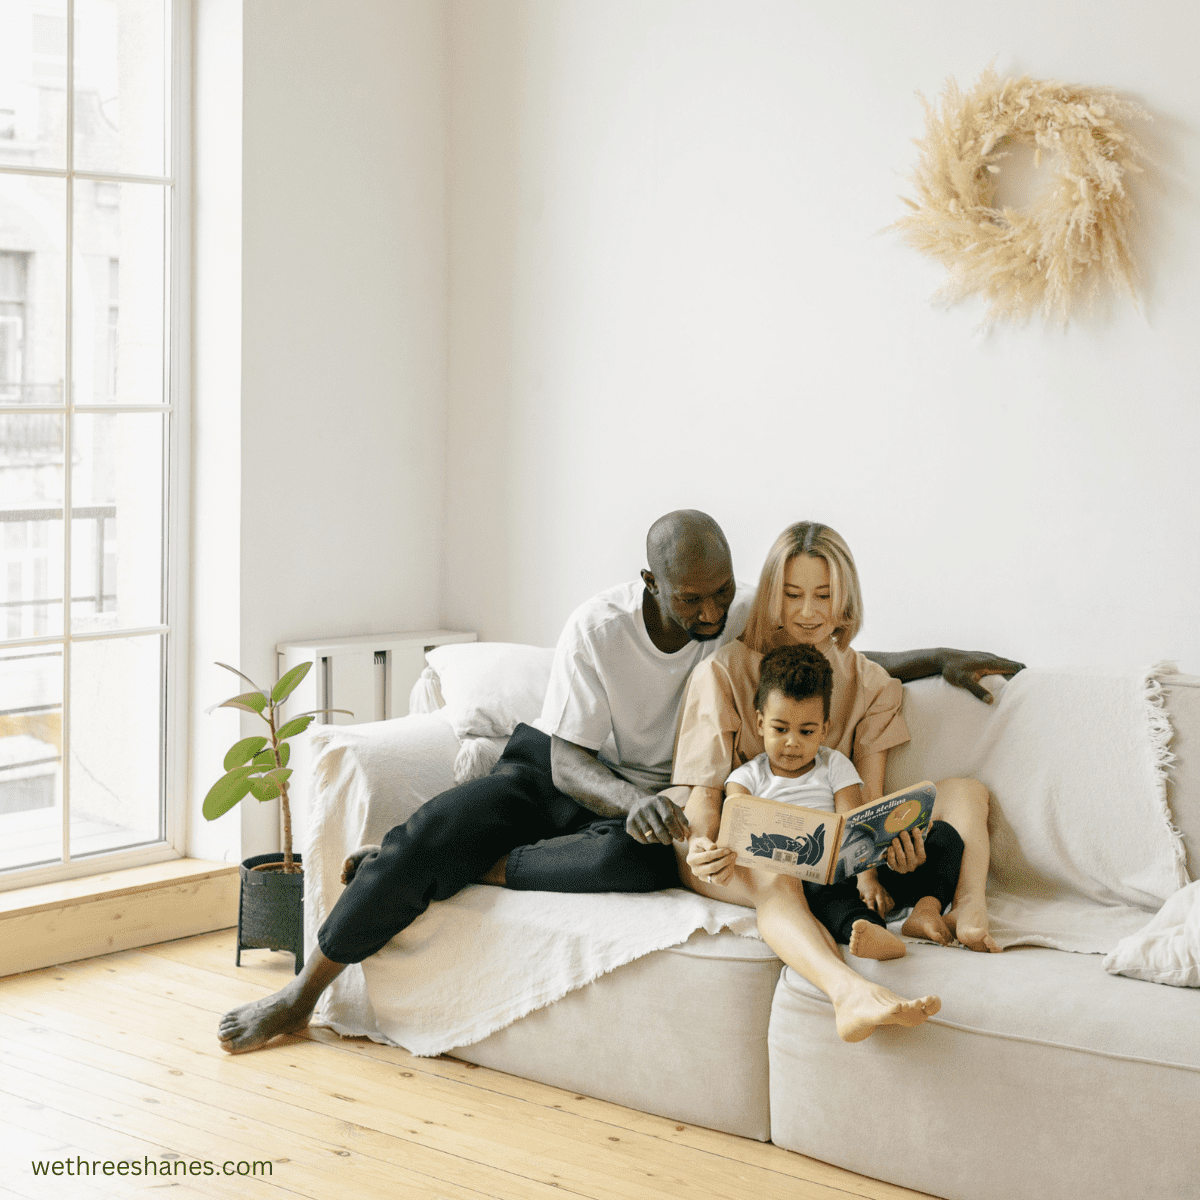 How to Achieve Your Minimalism Goals with a Family